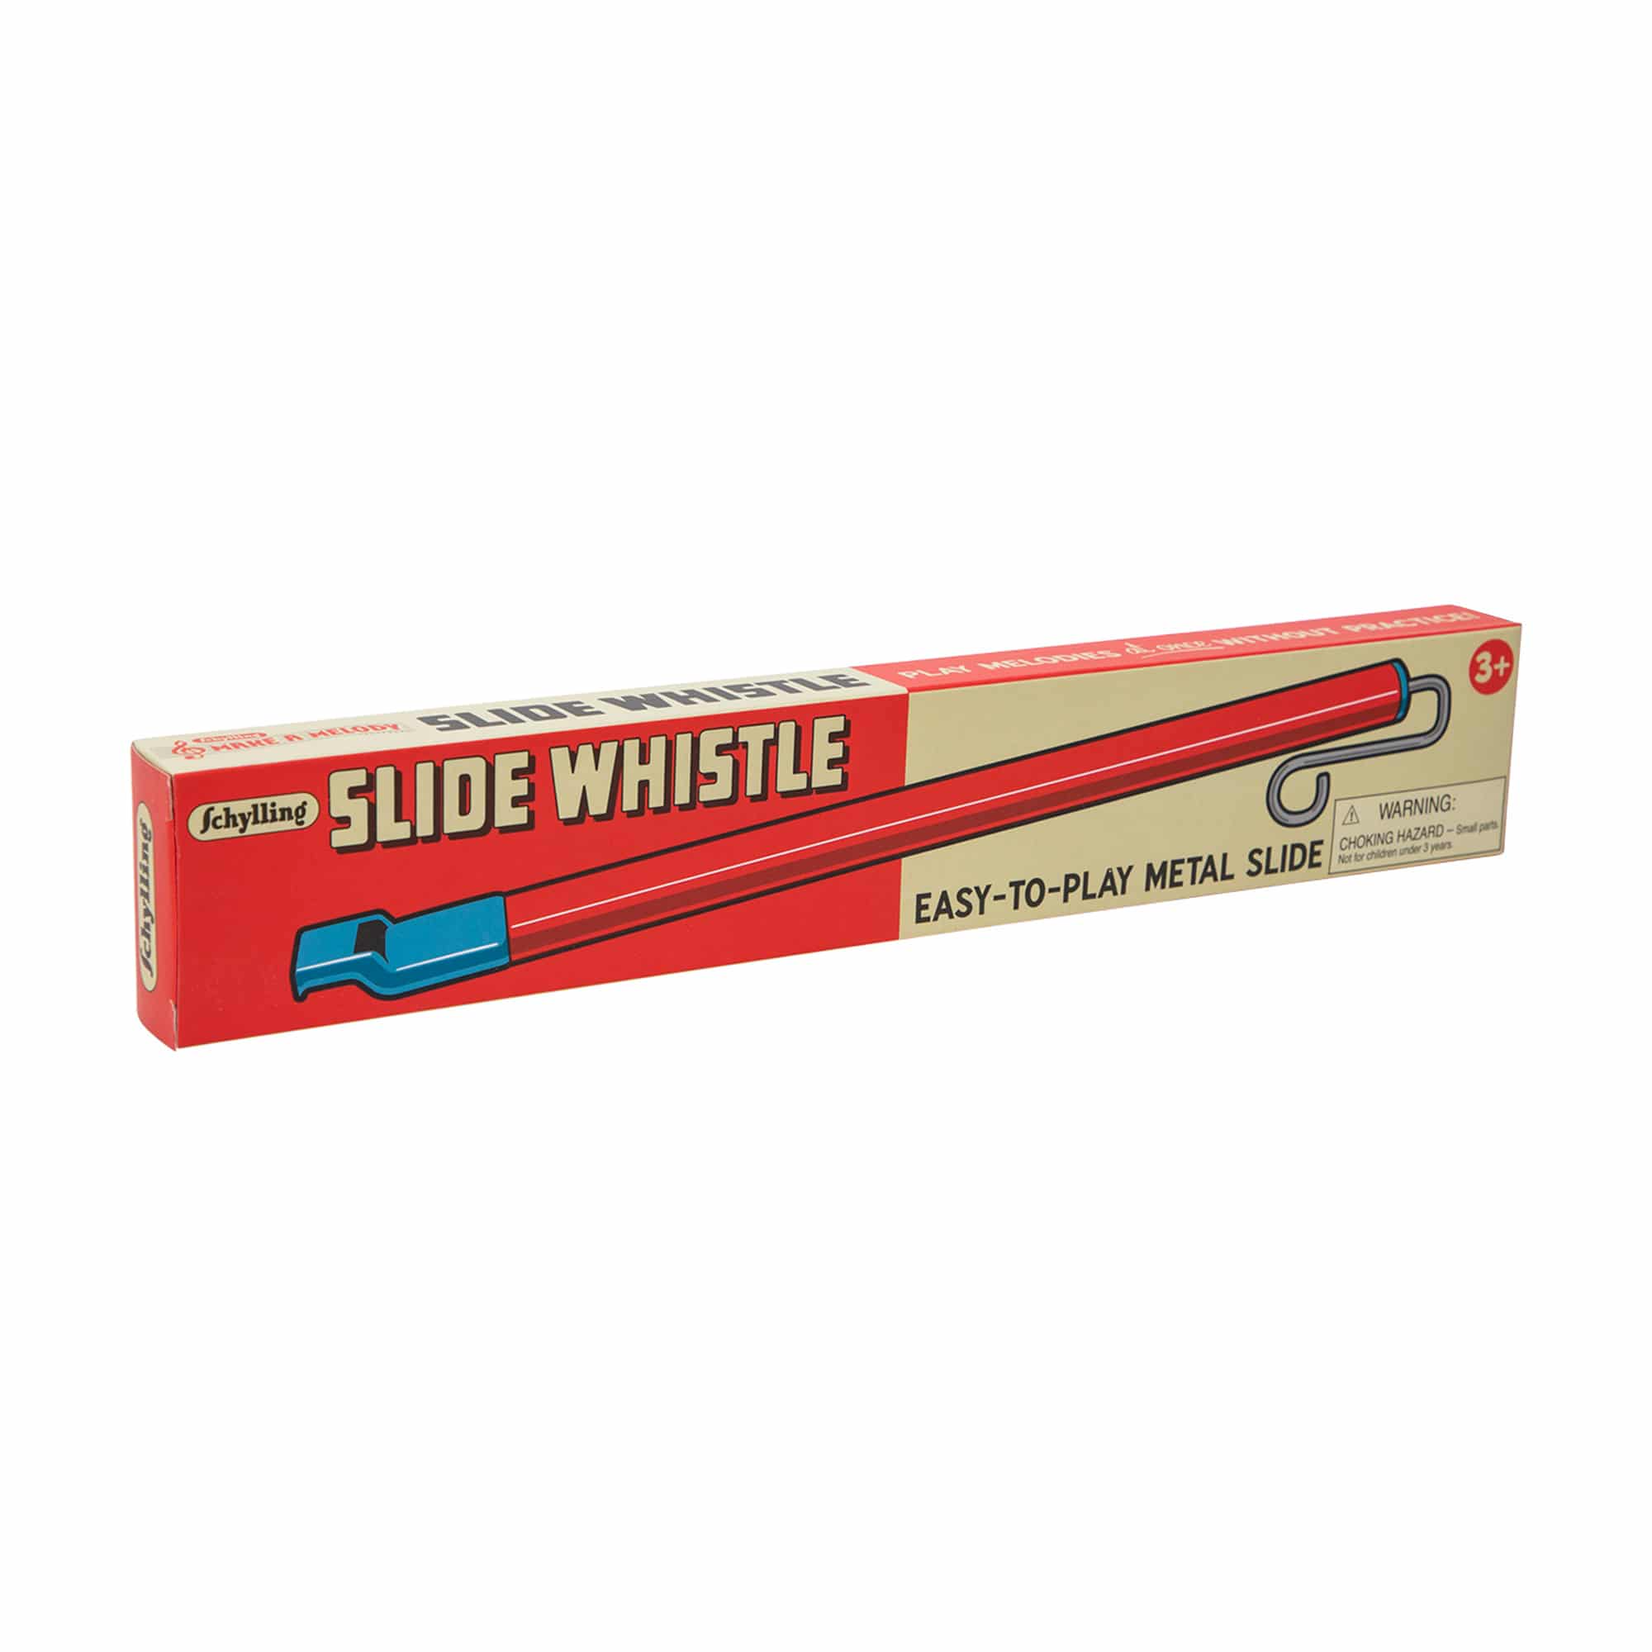 Schylling Slide Whistle